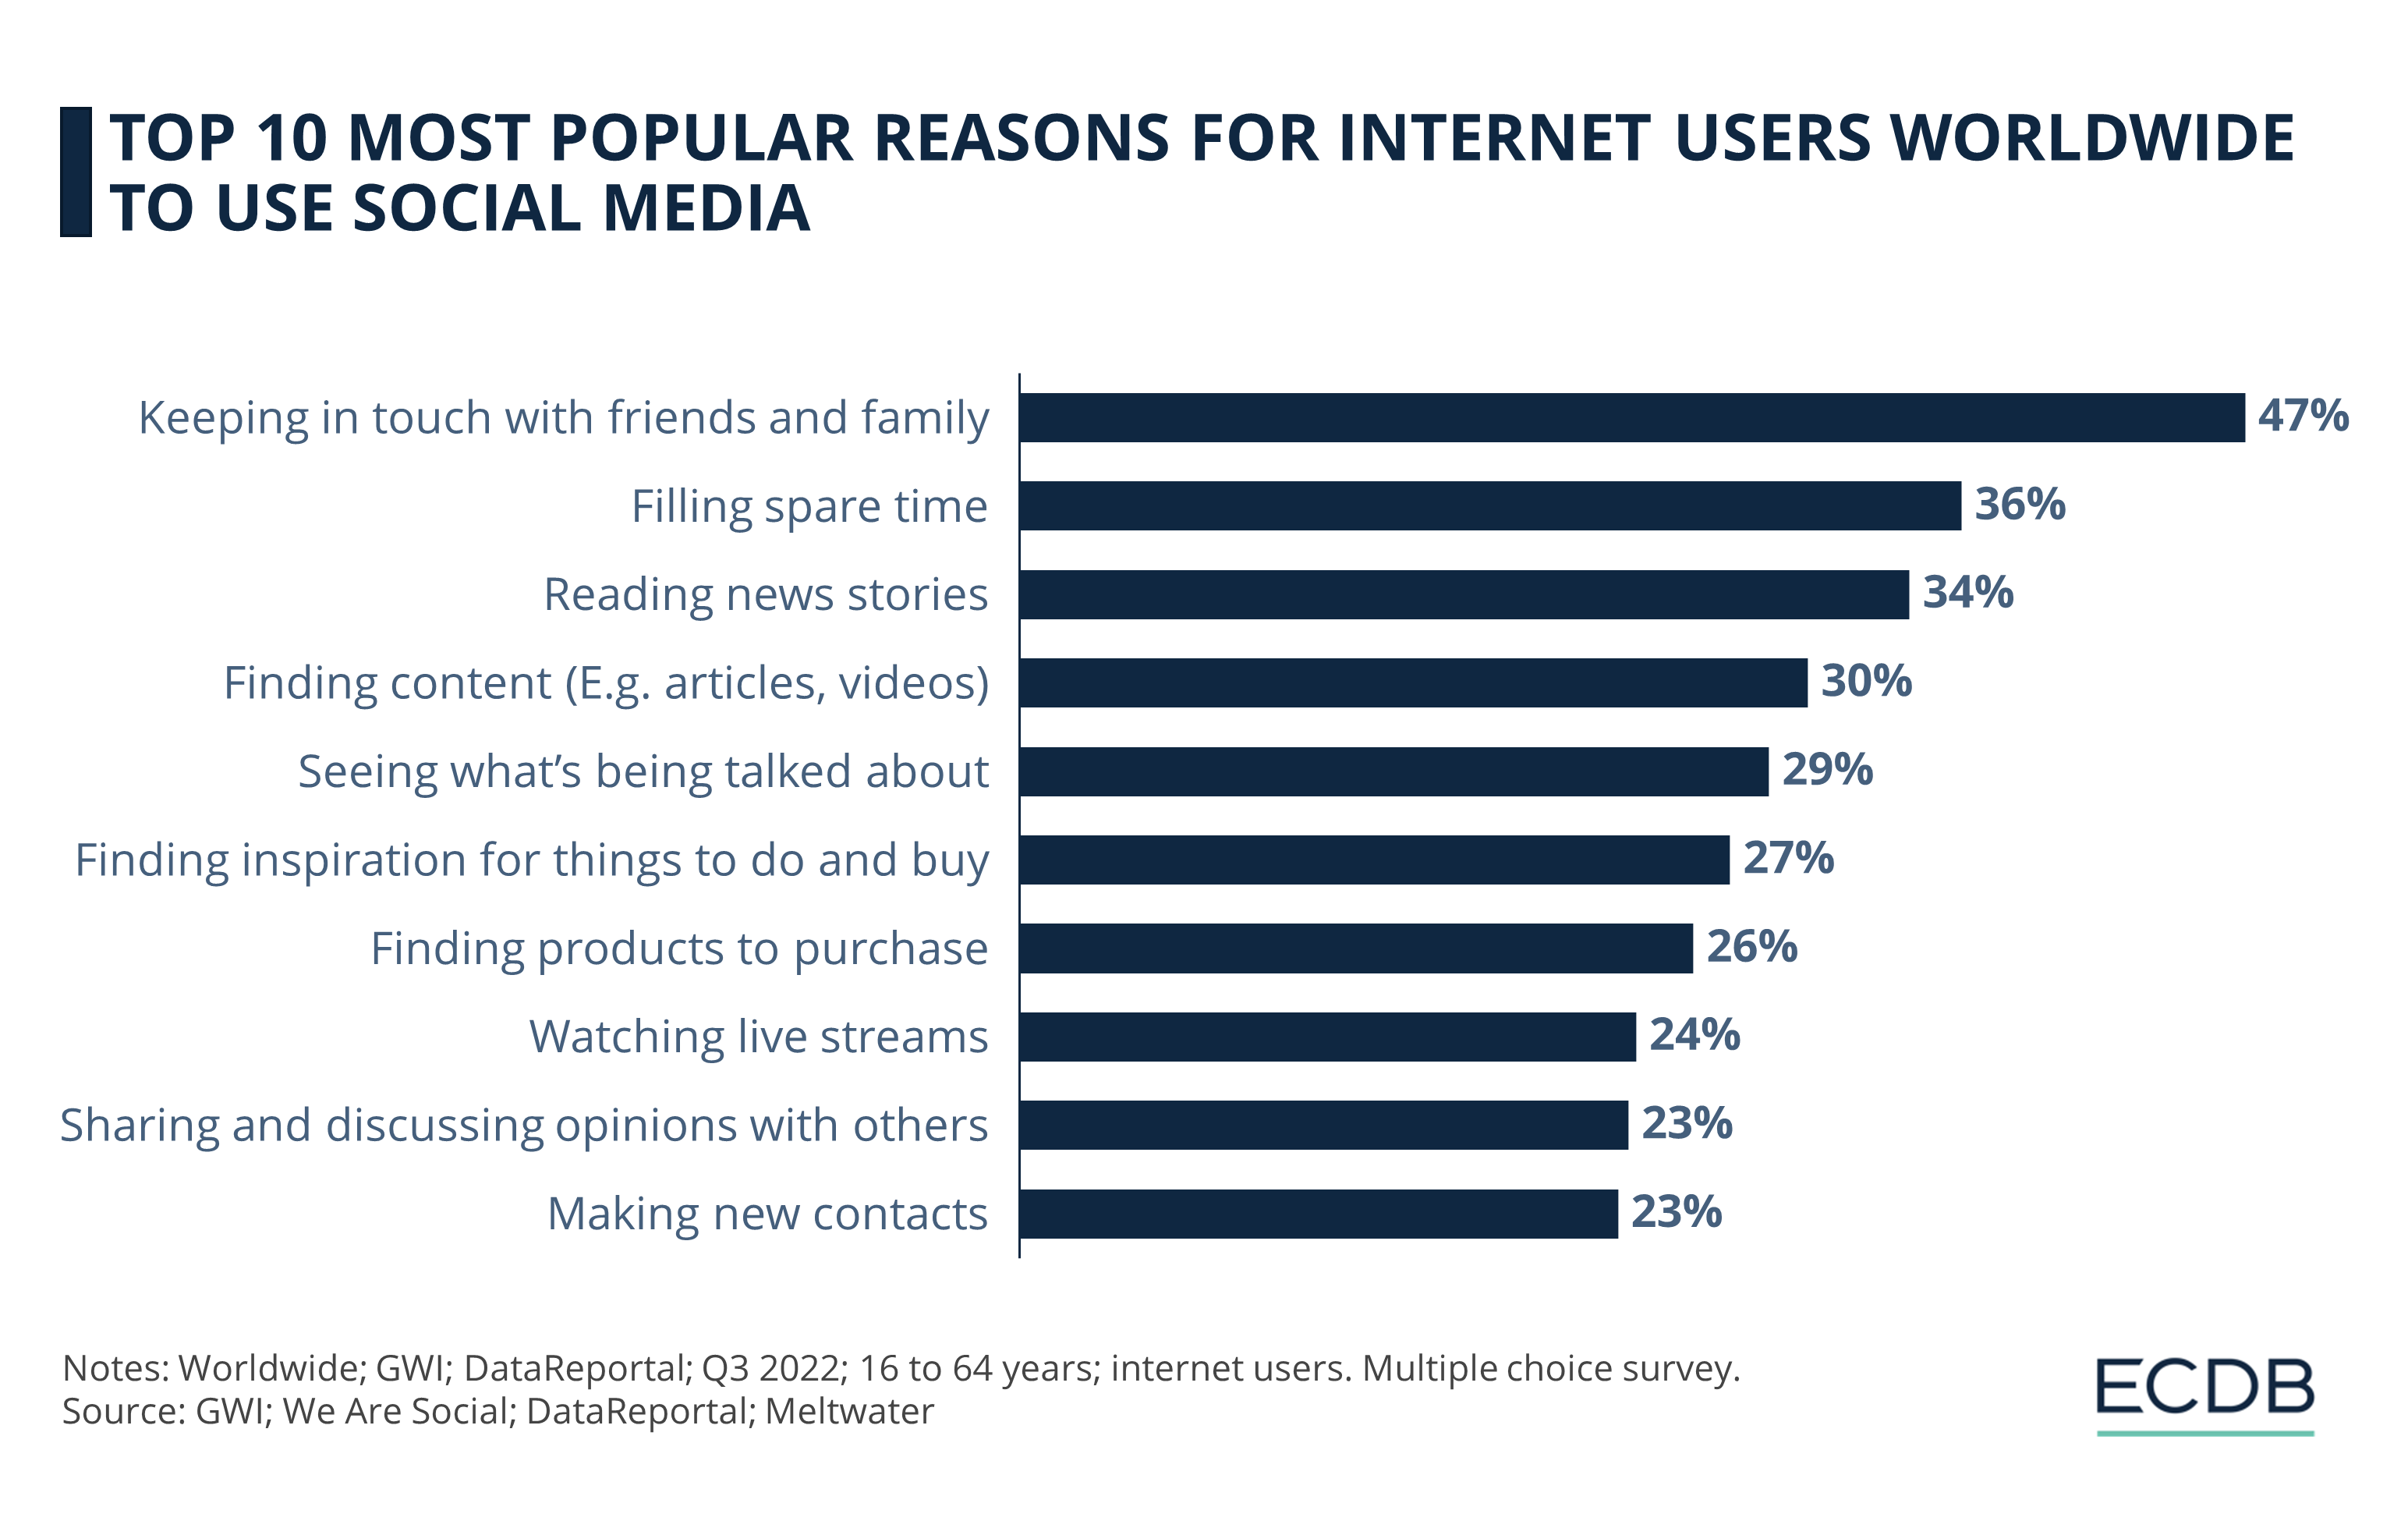 Top 10 Most Popular Reasons for Internet Users Worldwide to Use Social Media